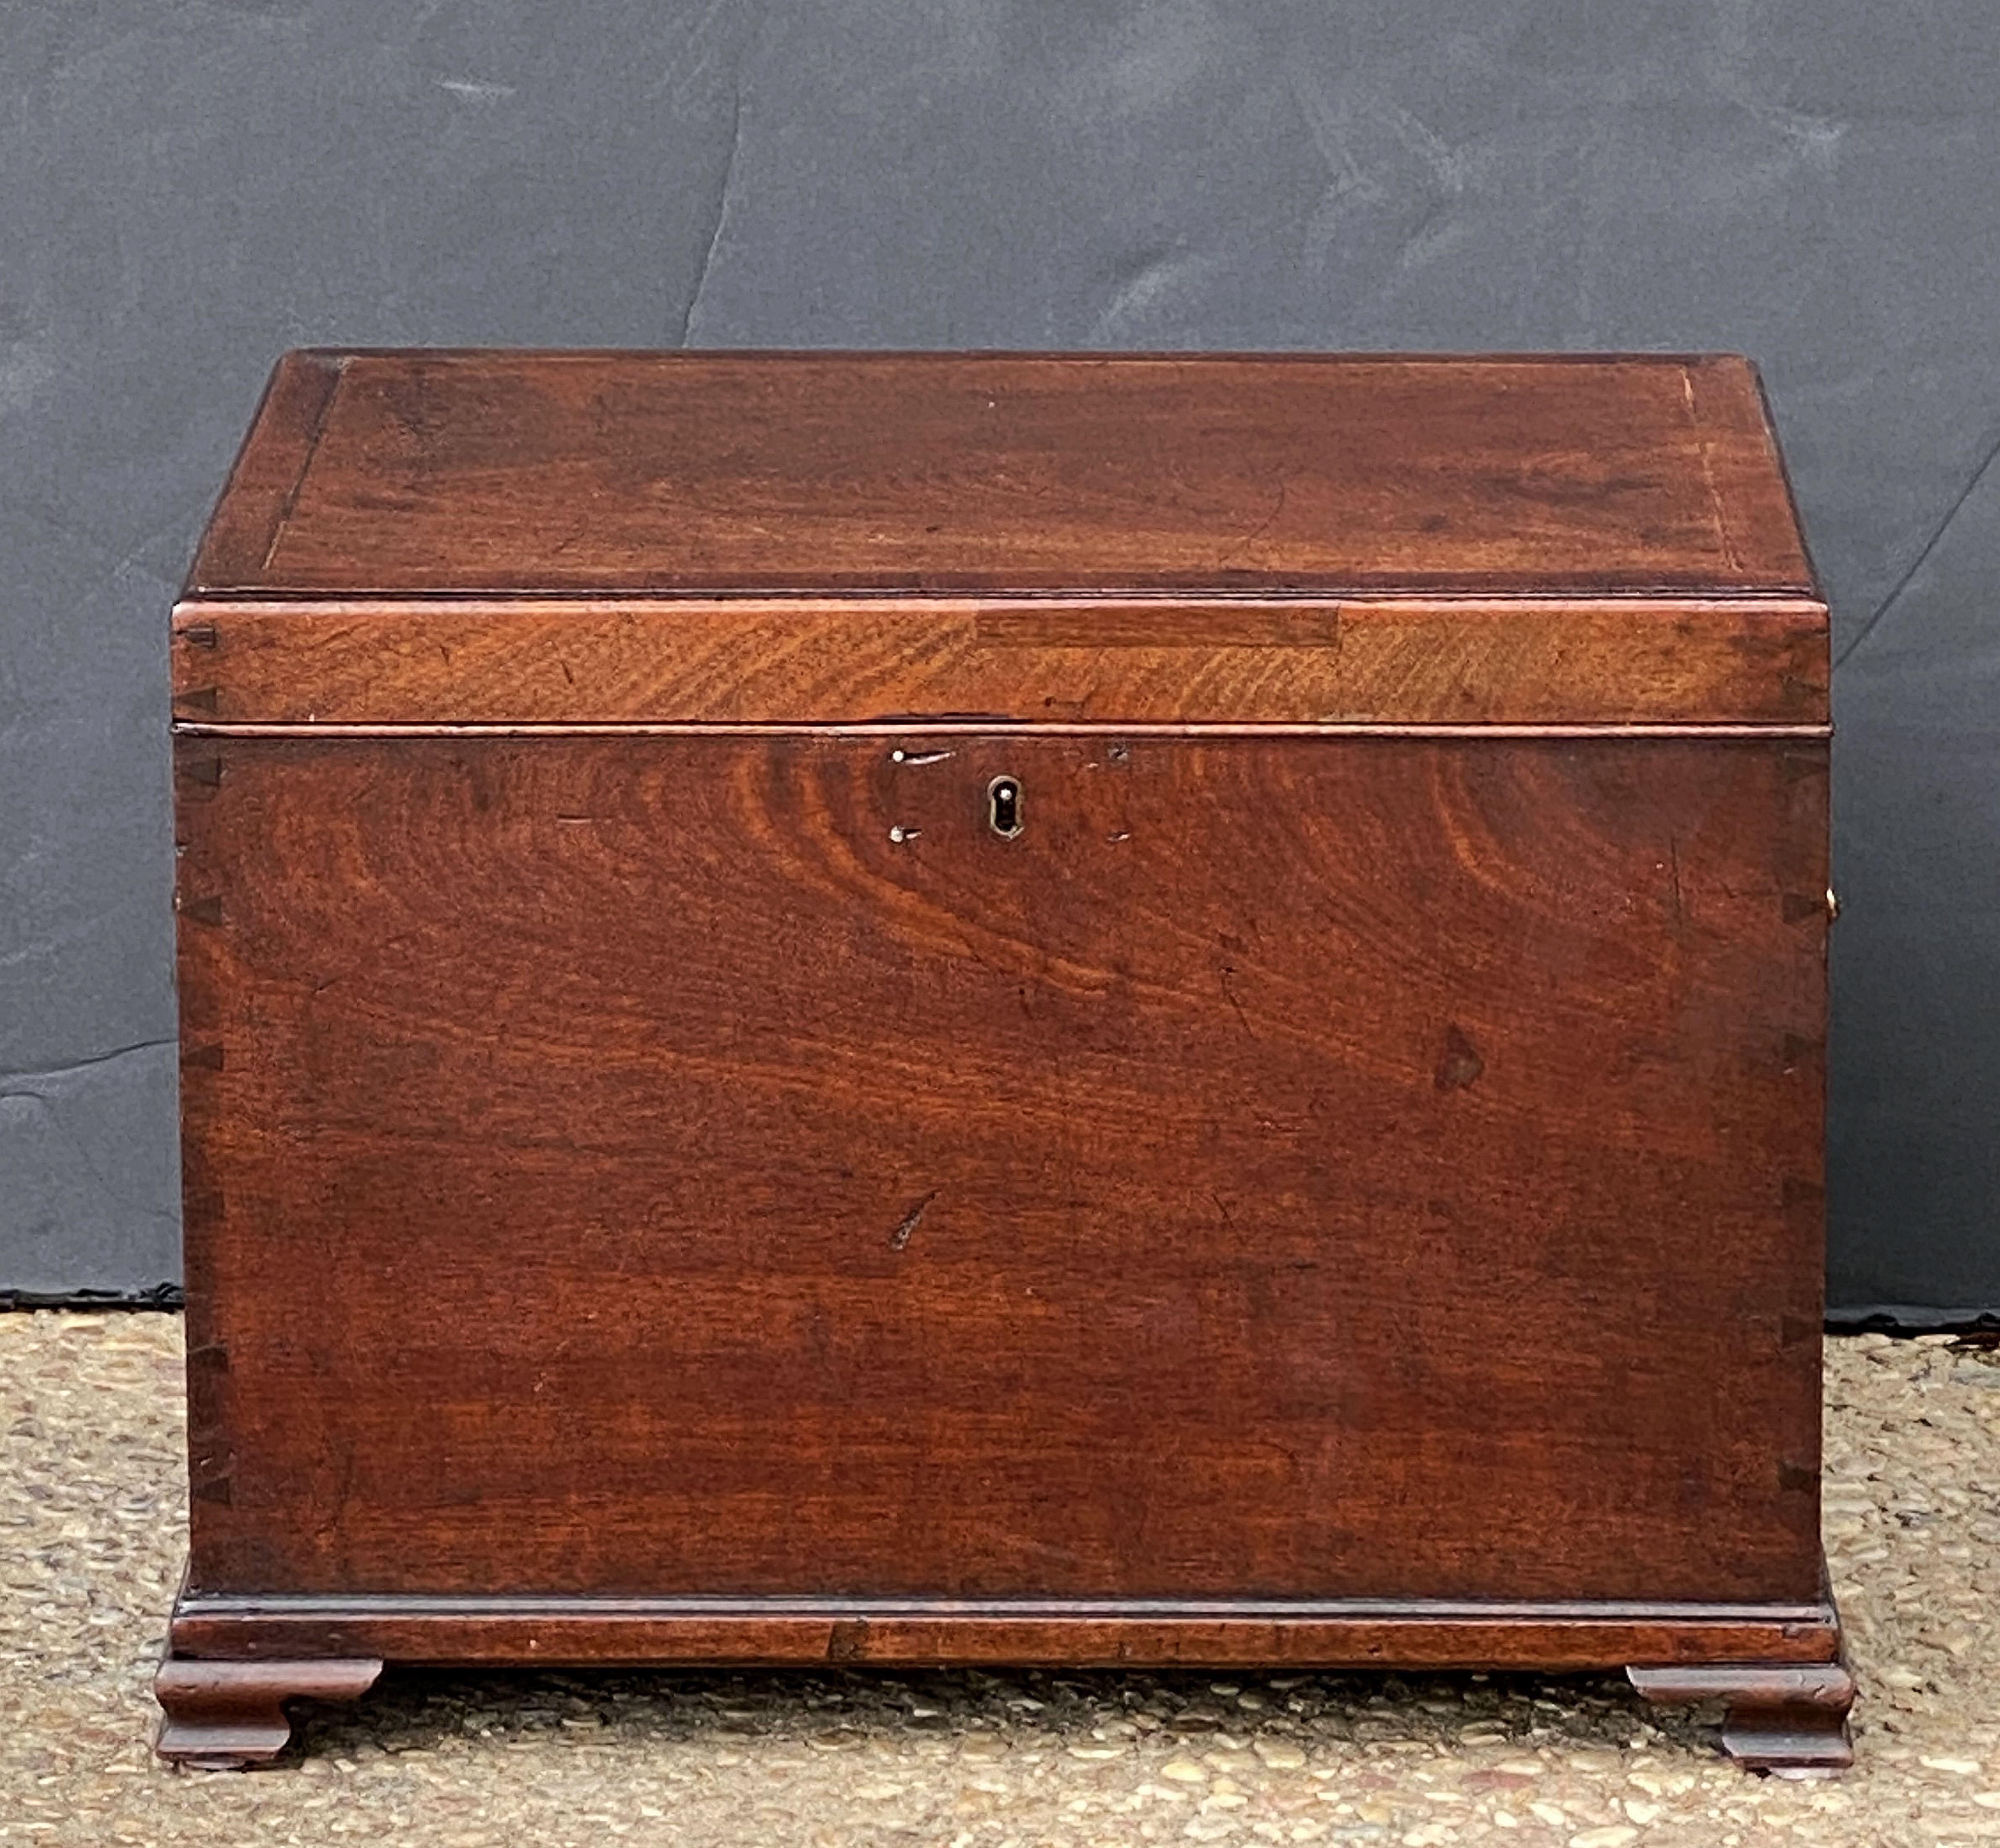 A fine period English small chest or box of mahogany from the George III era, featuring a moulded hinge top with inlaid stringing around the circumference, over a rectangular base with swan handles and escutcheon of brass, resting on bracket feet.